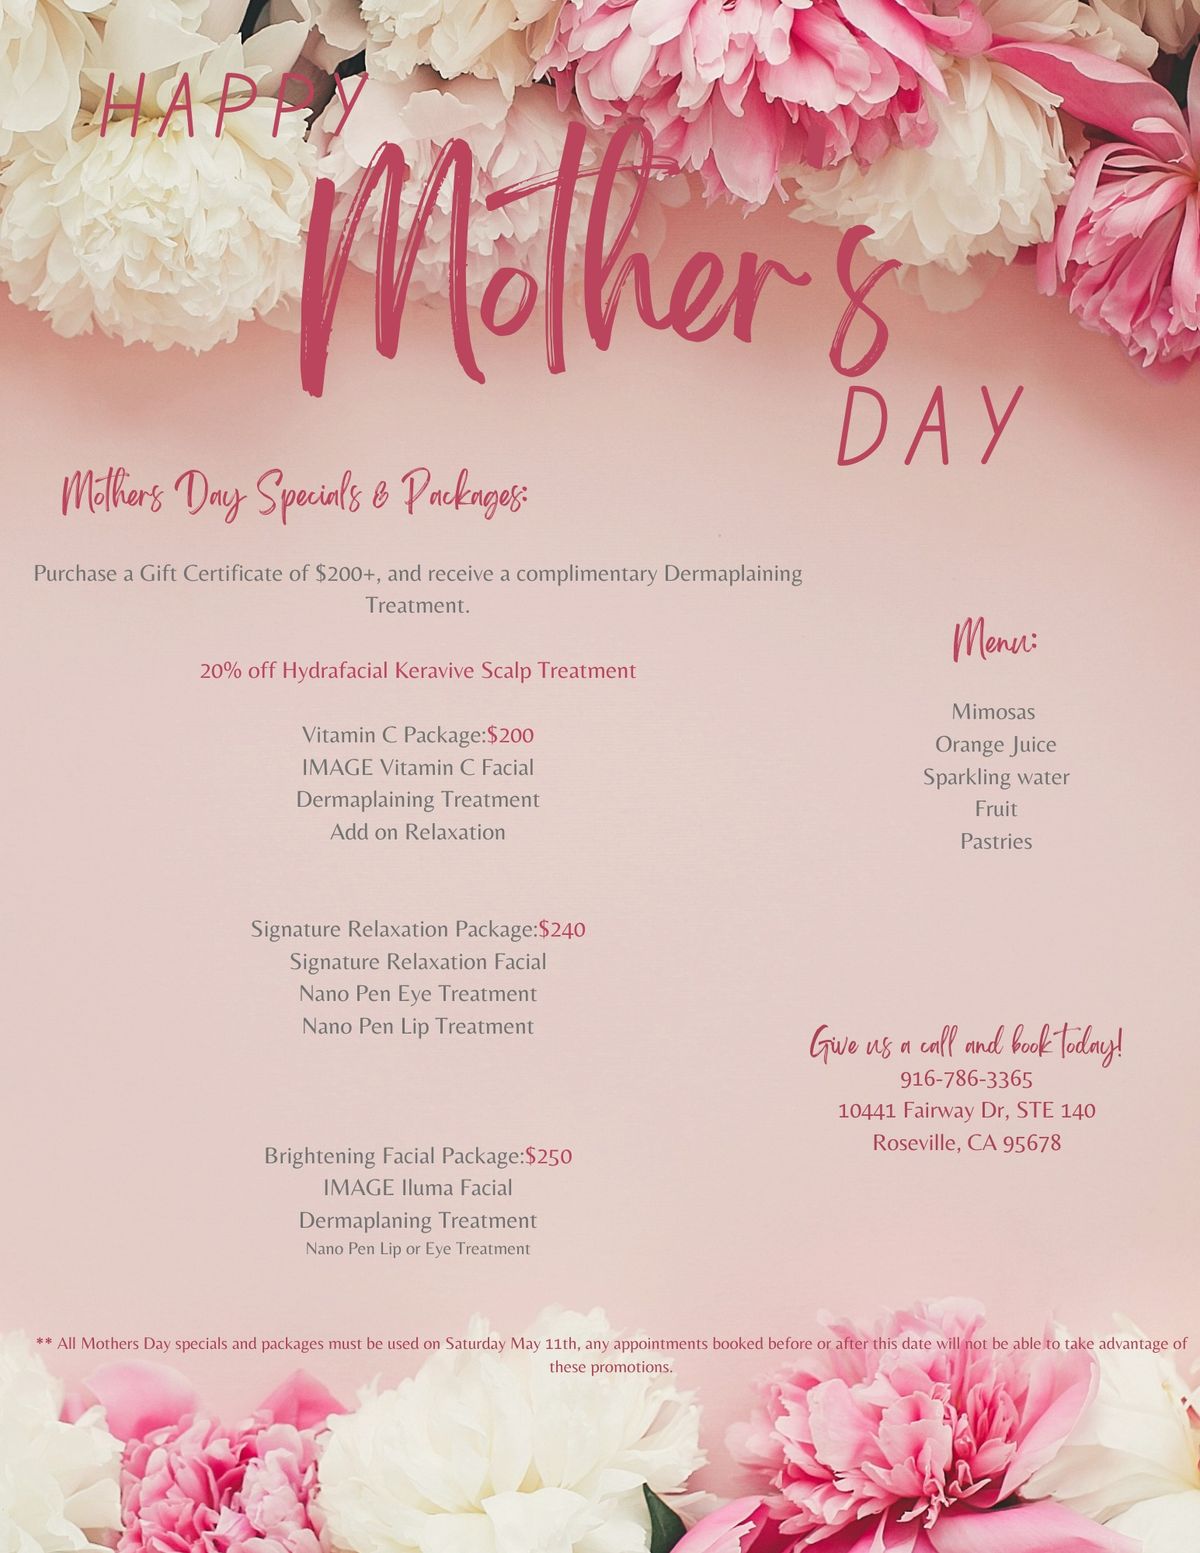 Mother's Day Celebration at Faces365